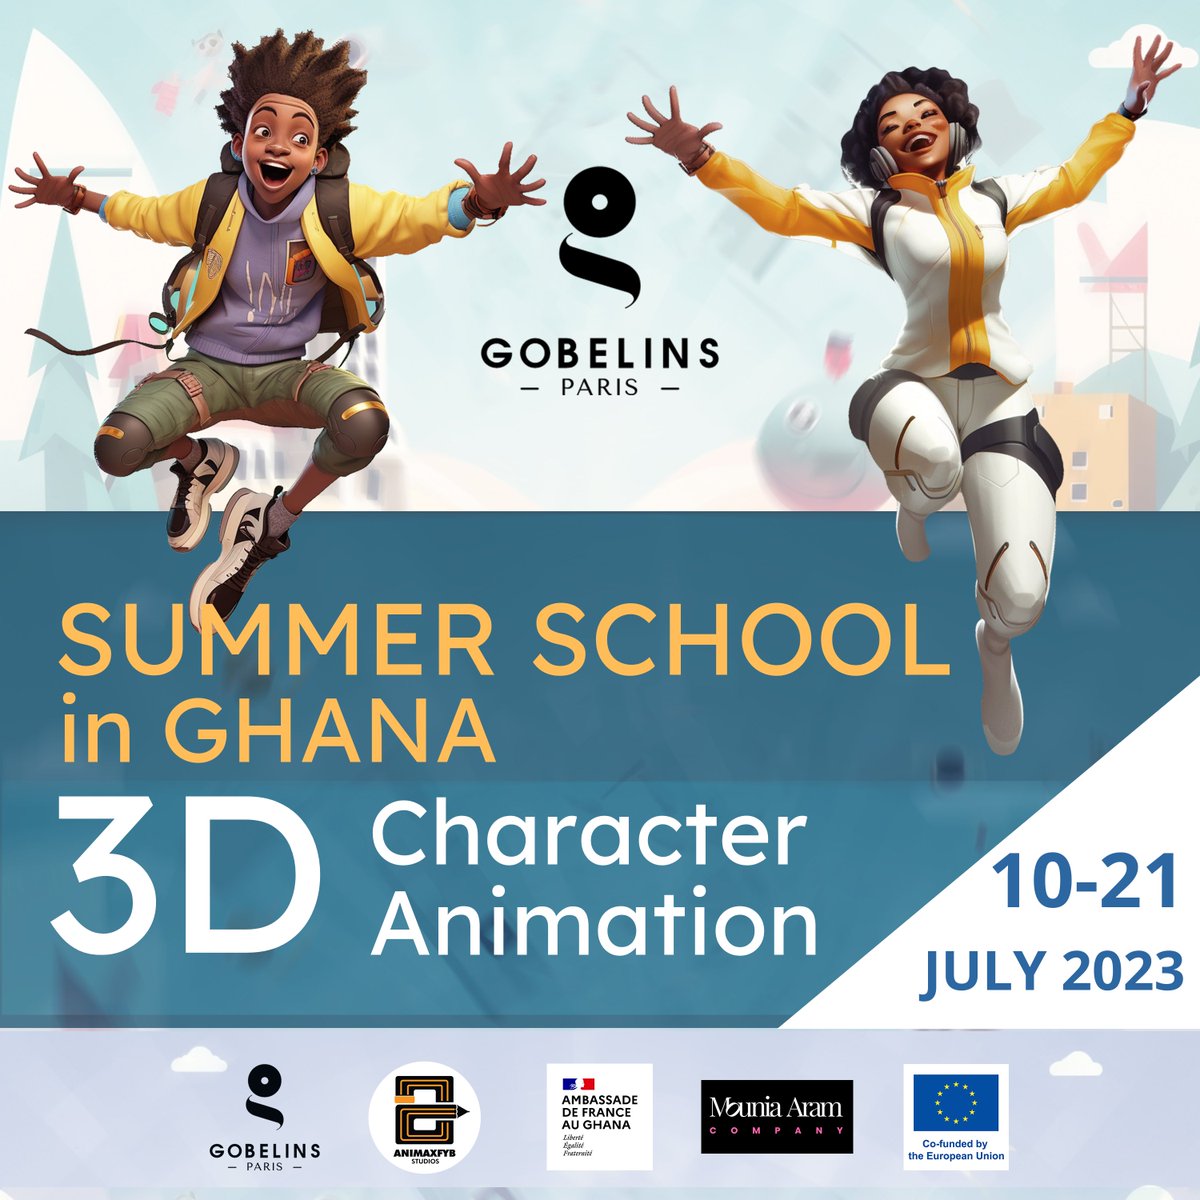 GOBELINS is heading to #Ghana in July! Join our Summer School in #3D Character #Animation!
From 10-21 July 2023. 60 hours of training by GOBELINS Paris, @animaxfyb Studios and @Mouniamoun More: bit.ly/43s4h4f
W/ support of the Fr Embassy & the delegation of EU in Ghana.